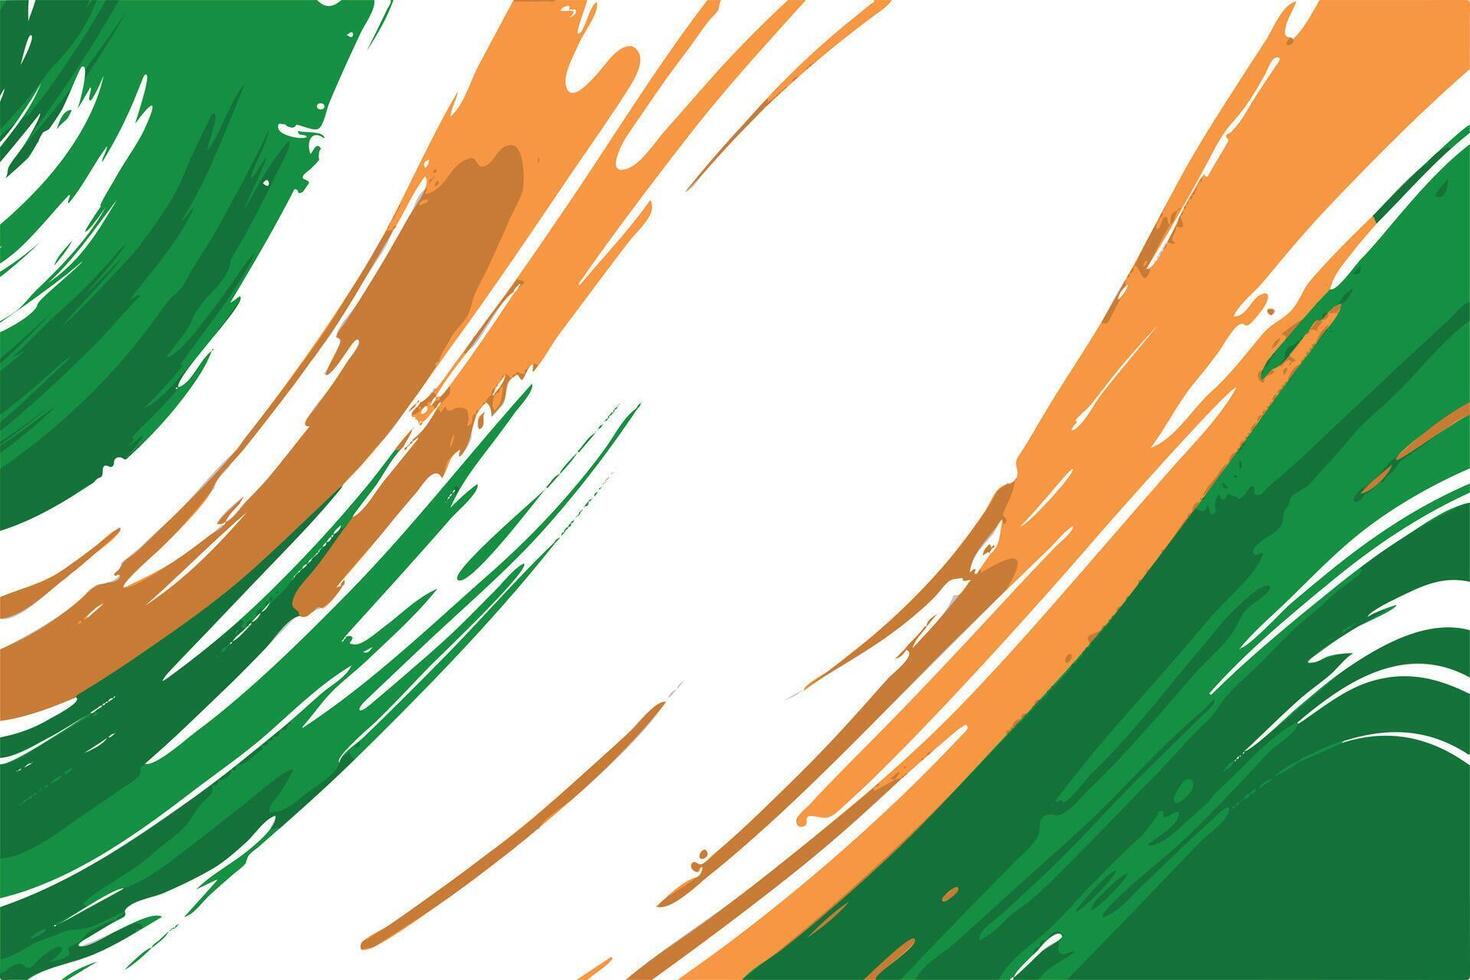 Abstract Art in India Flag Colors orange, green, and white Brush Strokes vector